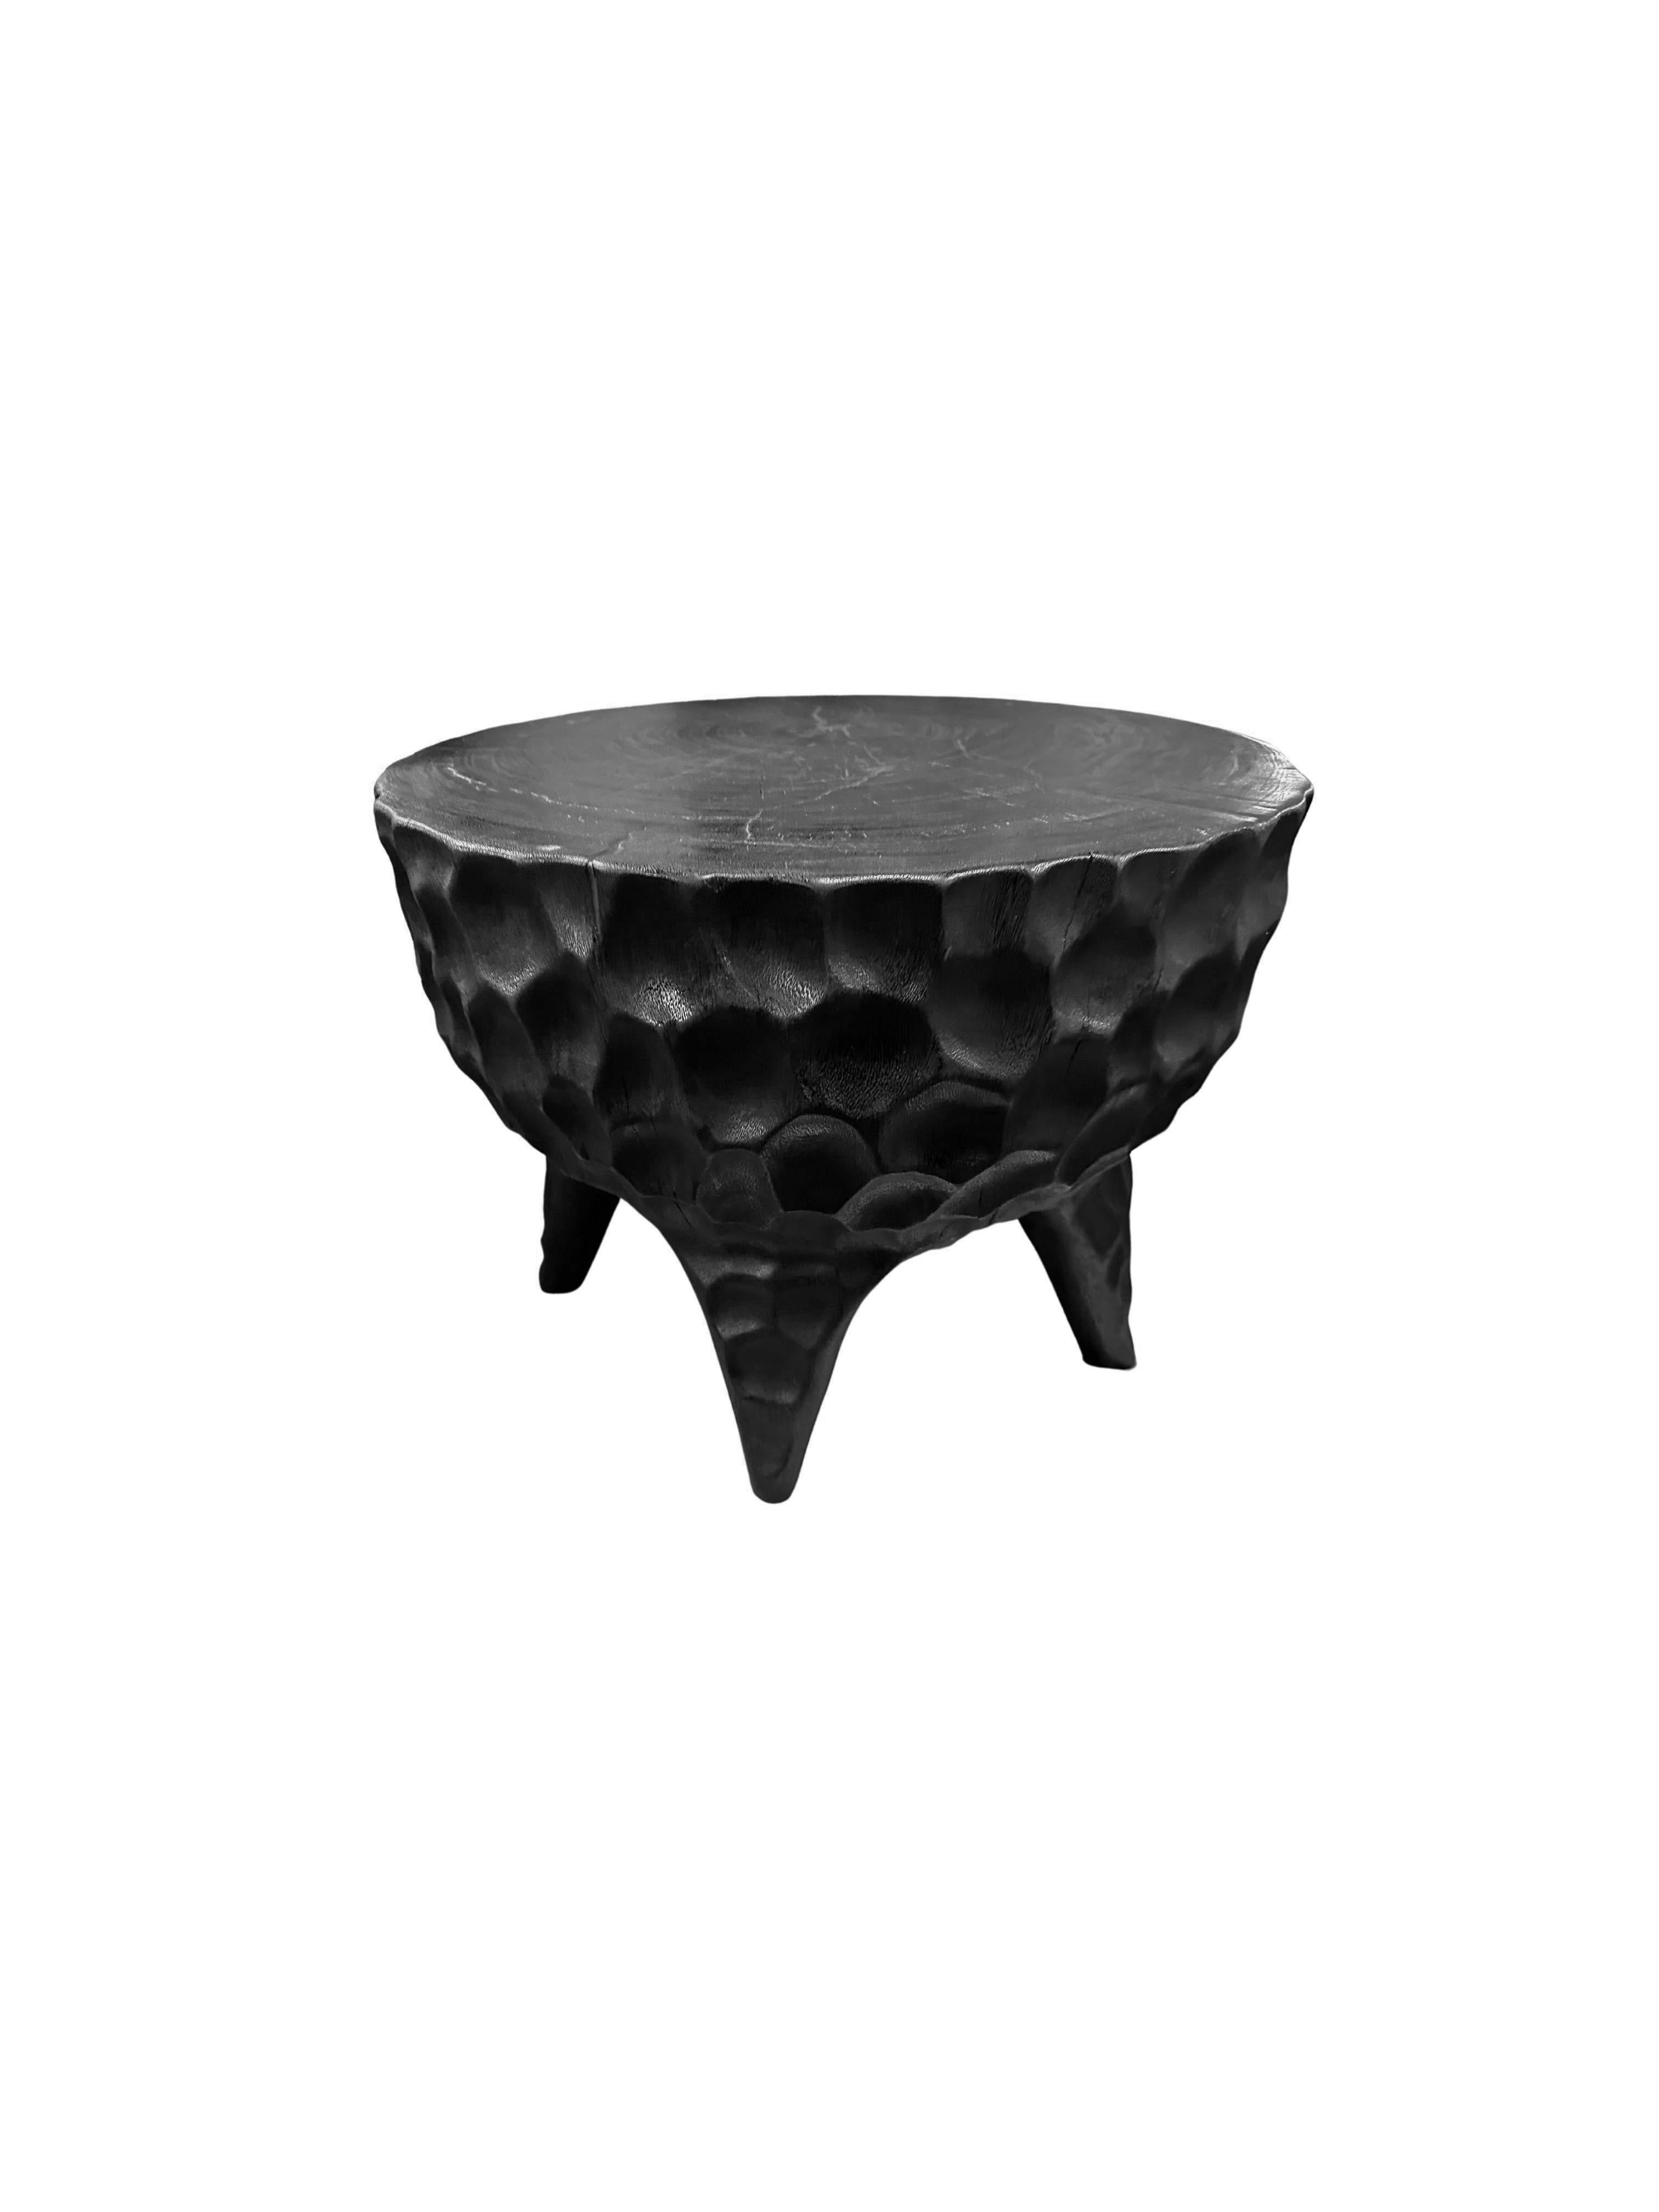 Hand-Crafted Sculptural Side Table Solid Mango Wood, Hand-Hewn Detailing, Modern Organic For Sale